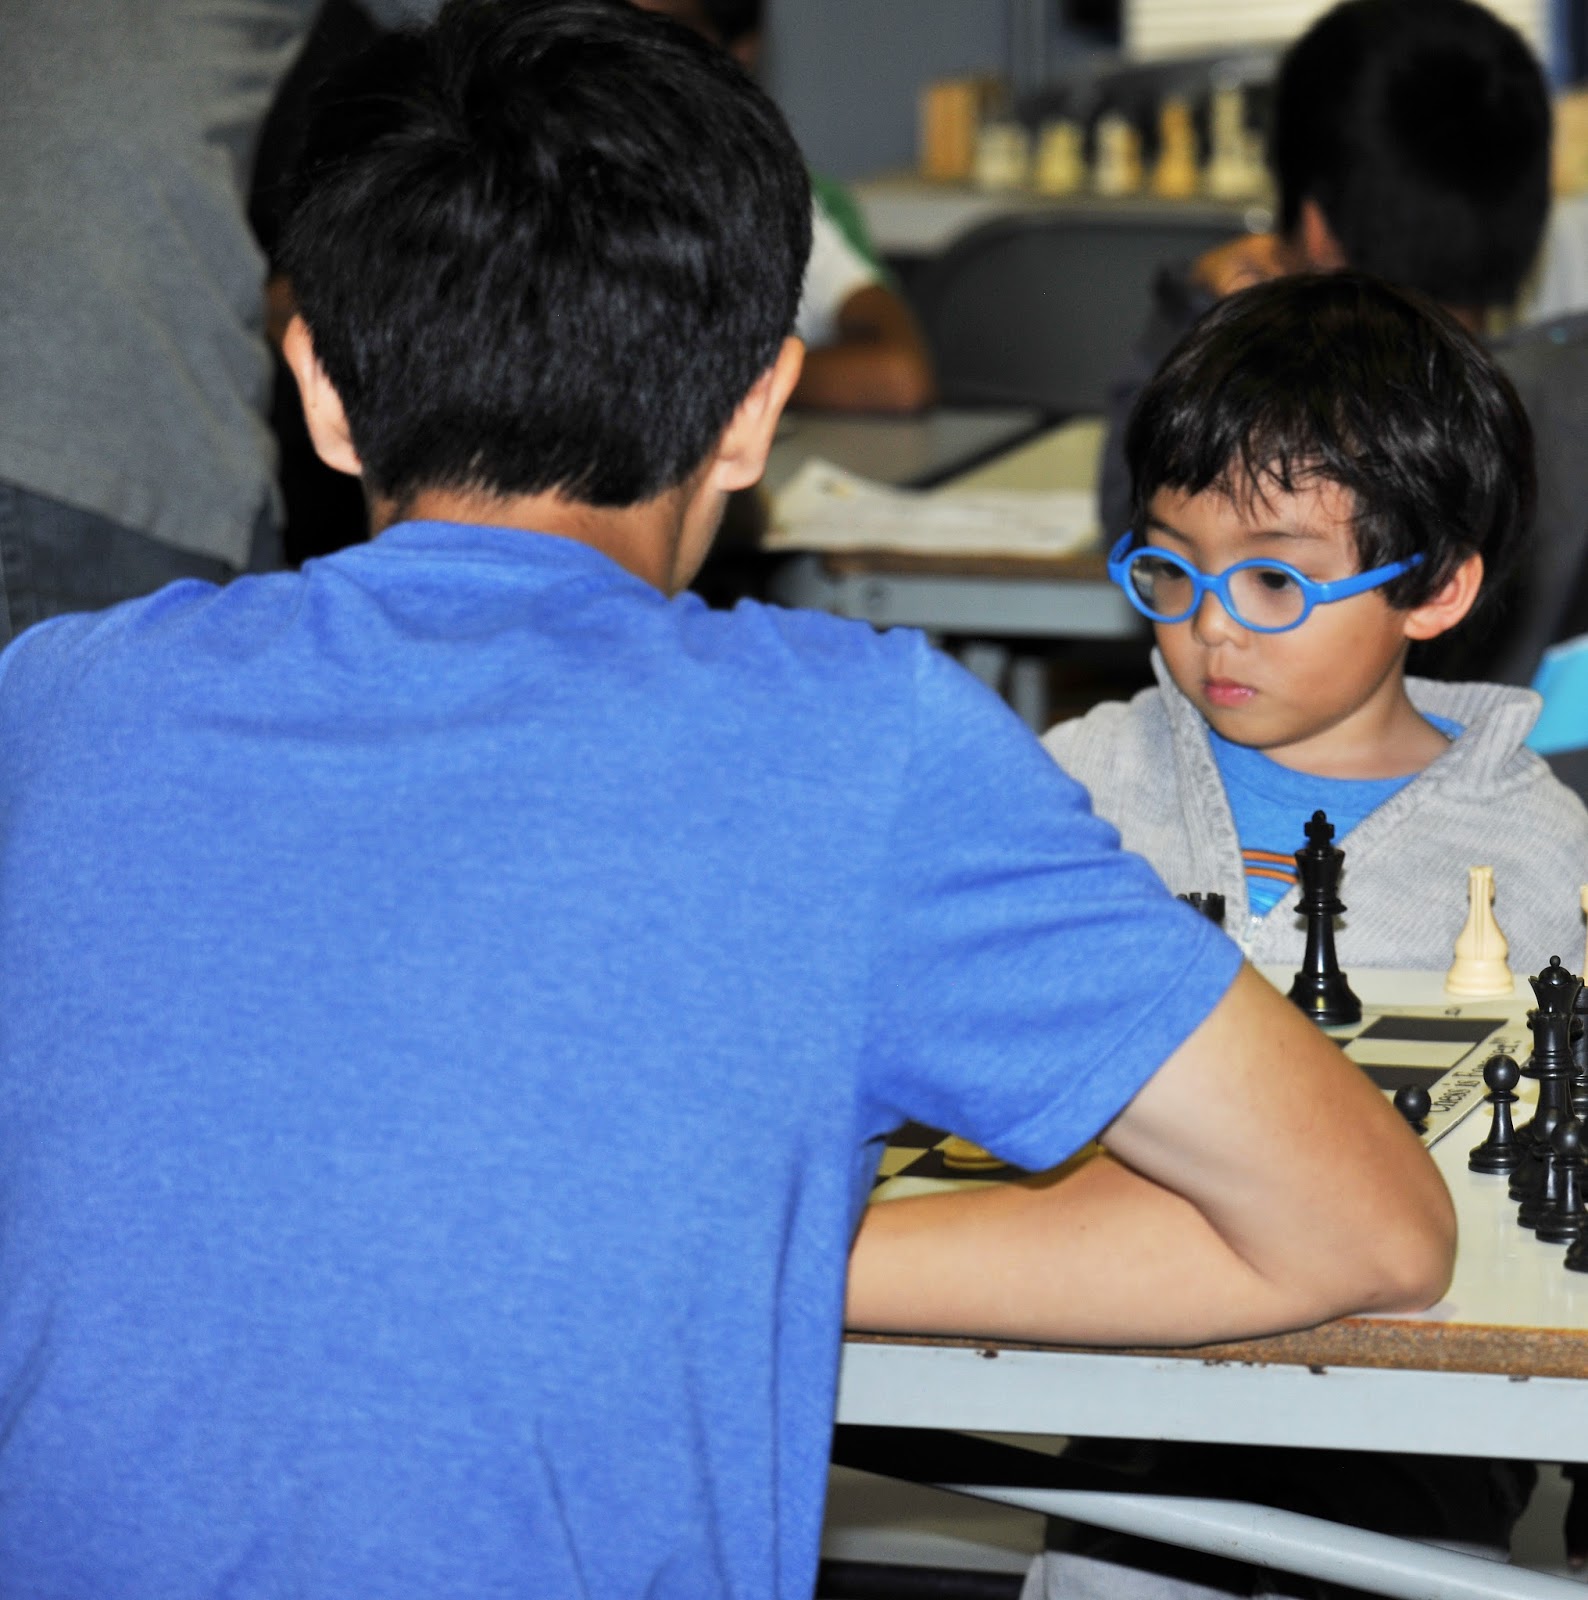 Weibel Chess NATIONAL CHESS DAY AT WEIBEL ELEMENTARY SCHOOL IN FREMONT